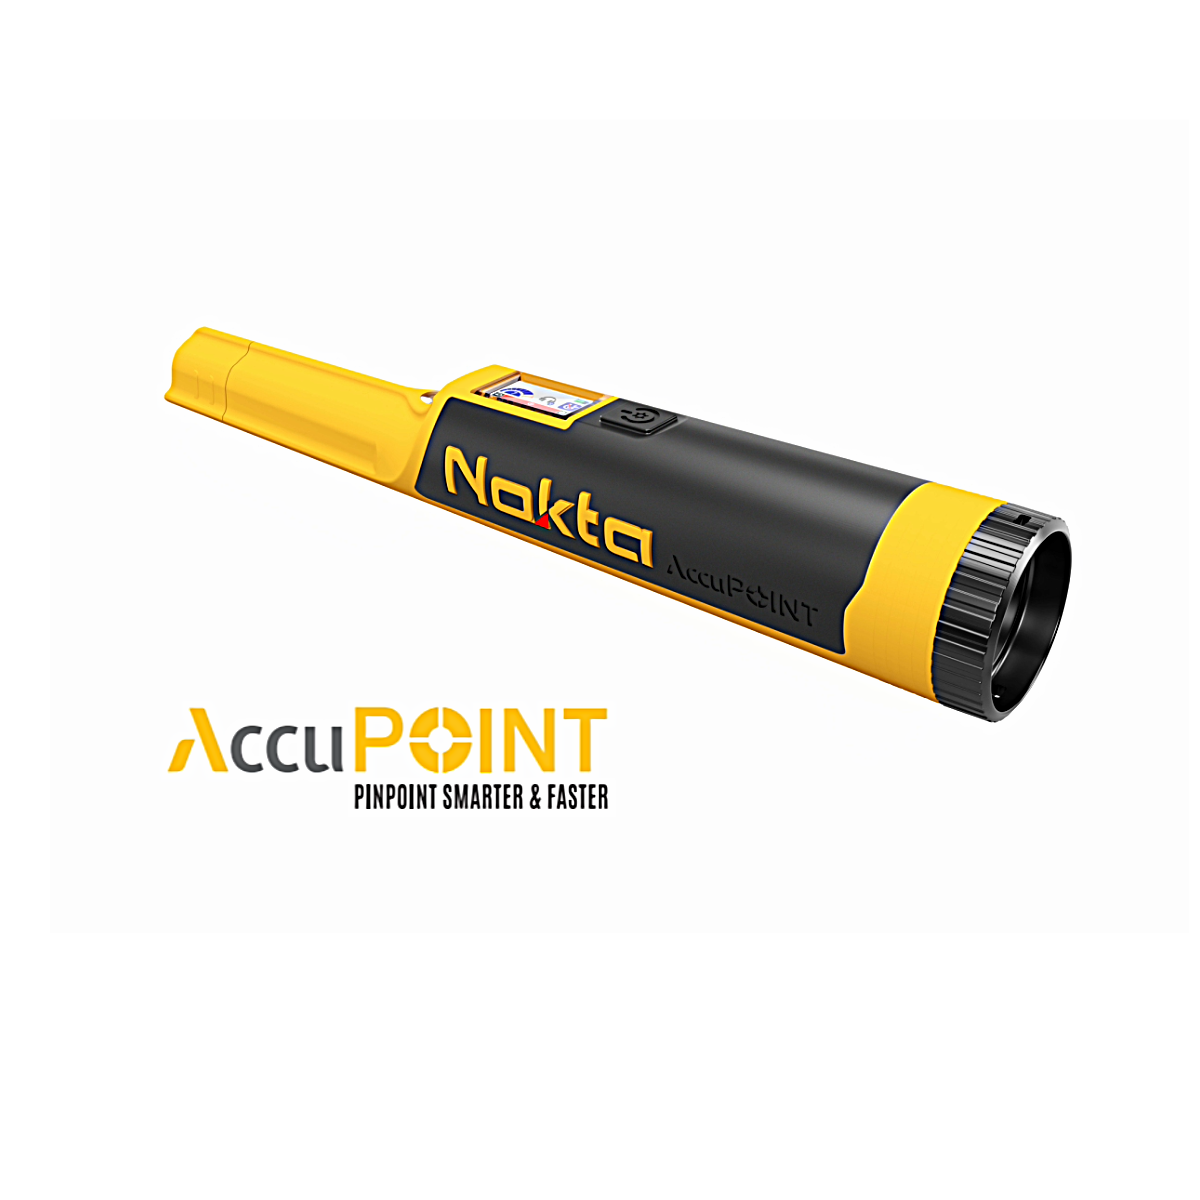 Nokta Accupoint Pinpointer LCD 